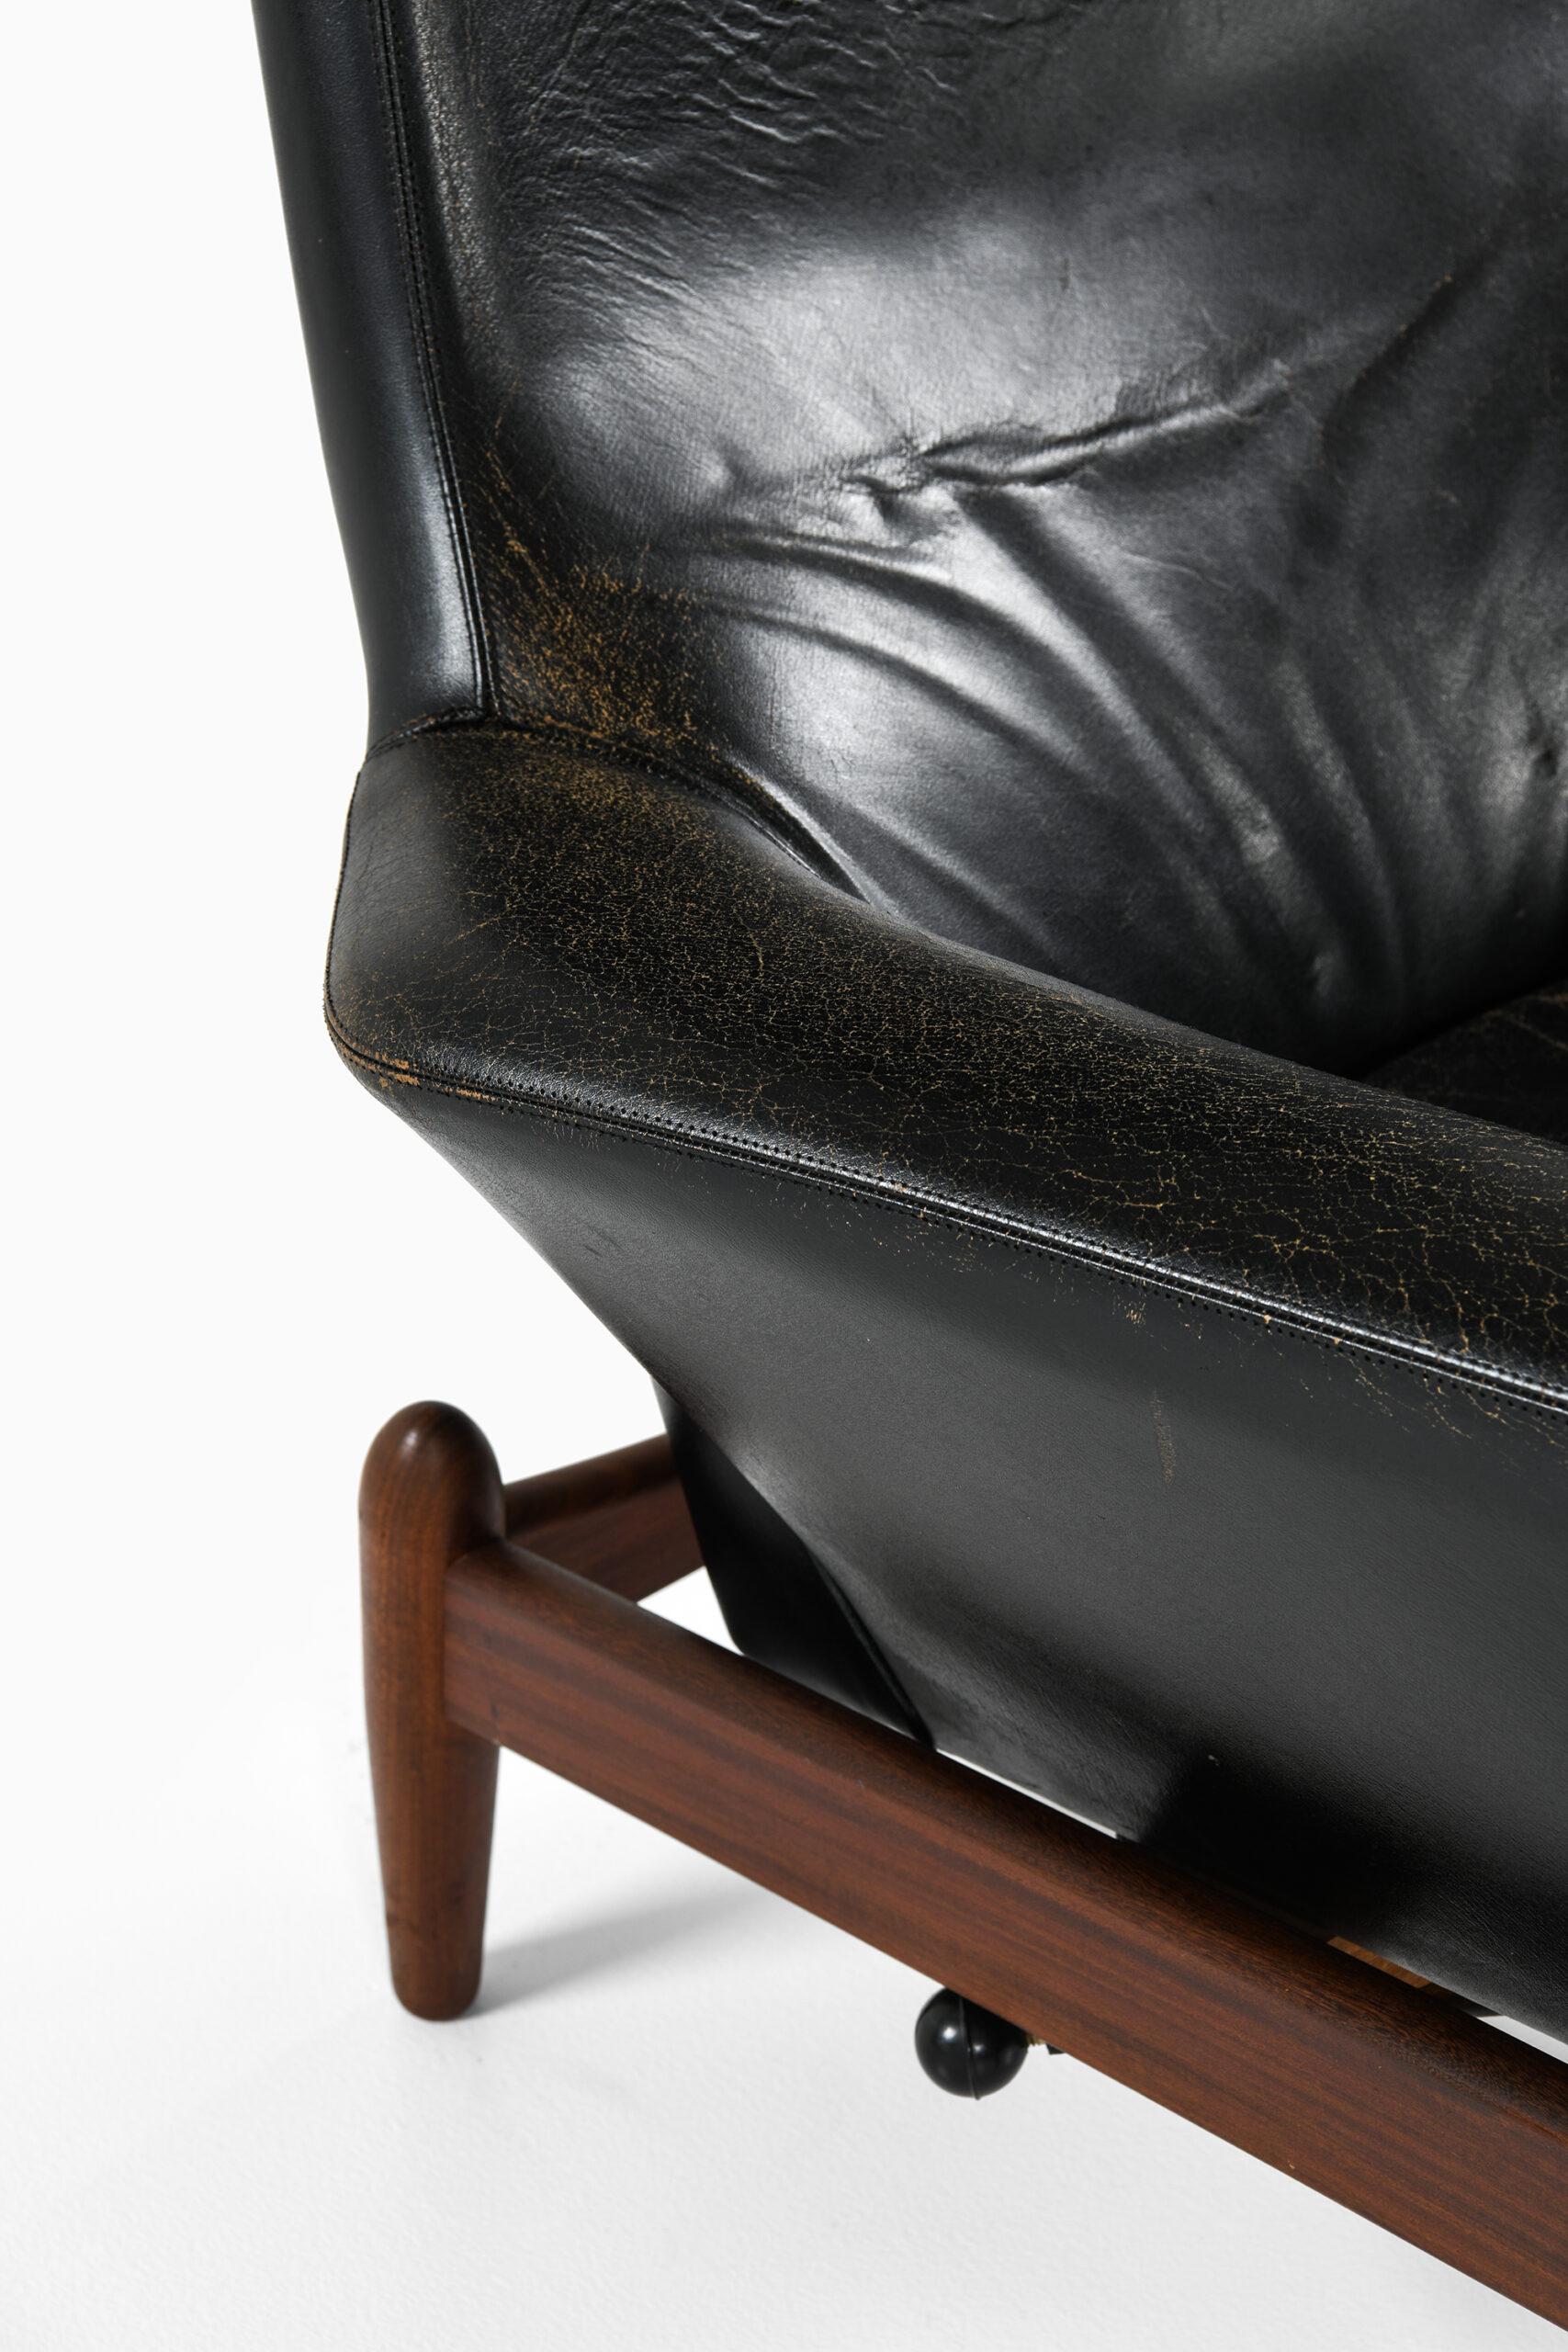 Leather Arnold Madsen Easy Chair with Stool Model MS 30 Produced by Madsen & Schubell For Sale